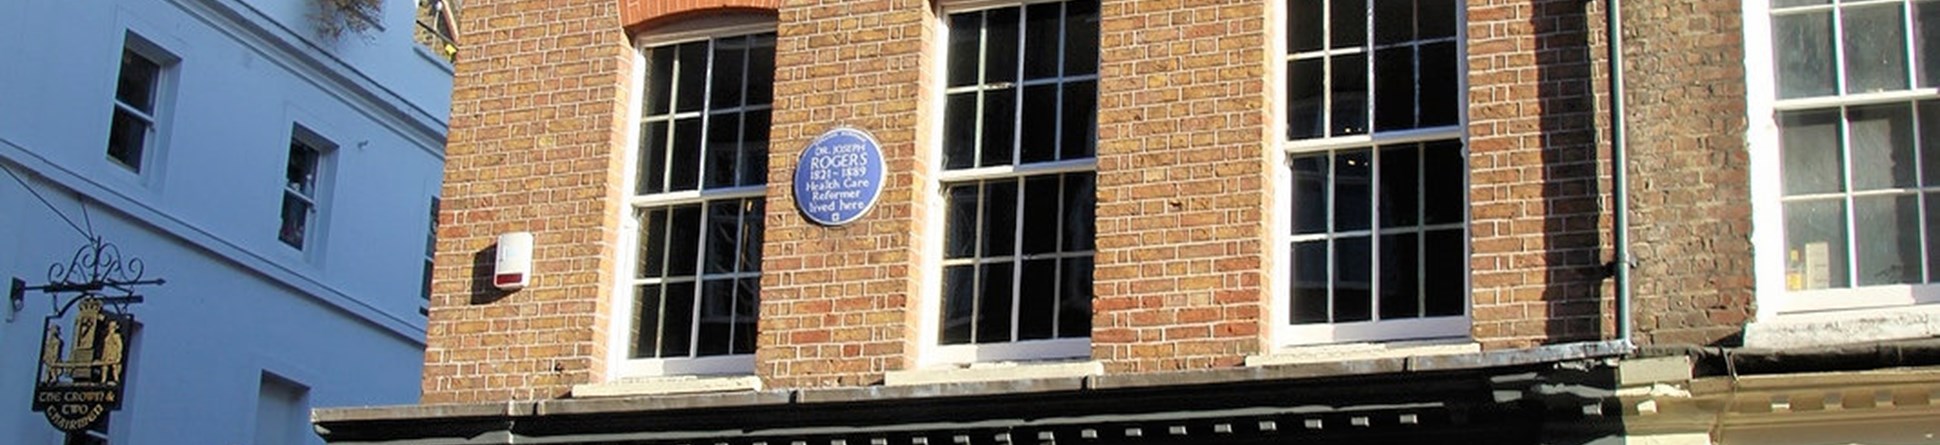 Georgian building with blue plaque dedicated to Dr Joseph Rogers, health care reformer who lived there 1821 to 1889.